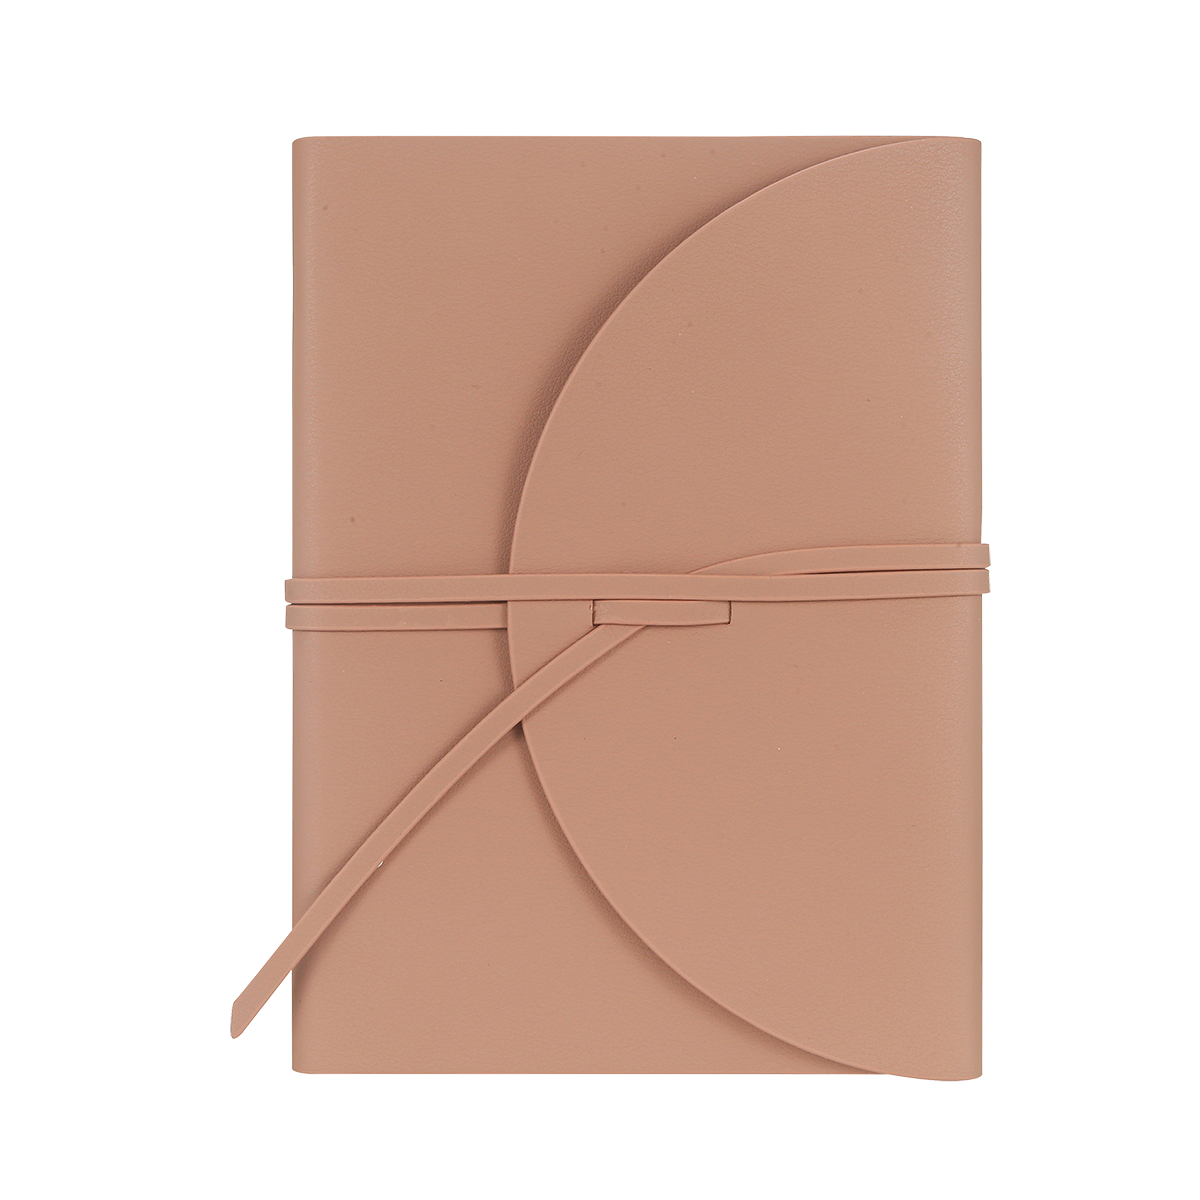 PELLA Dotted Bullet Journal, Flexy Leatherette Cover, 192pages, 80 gsm Cream Paper (Burnt Rose)